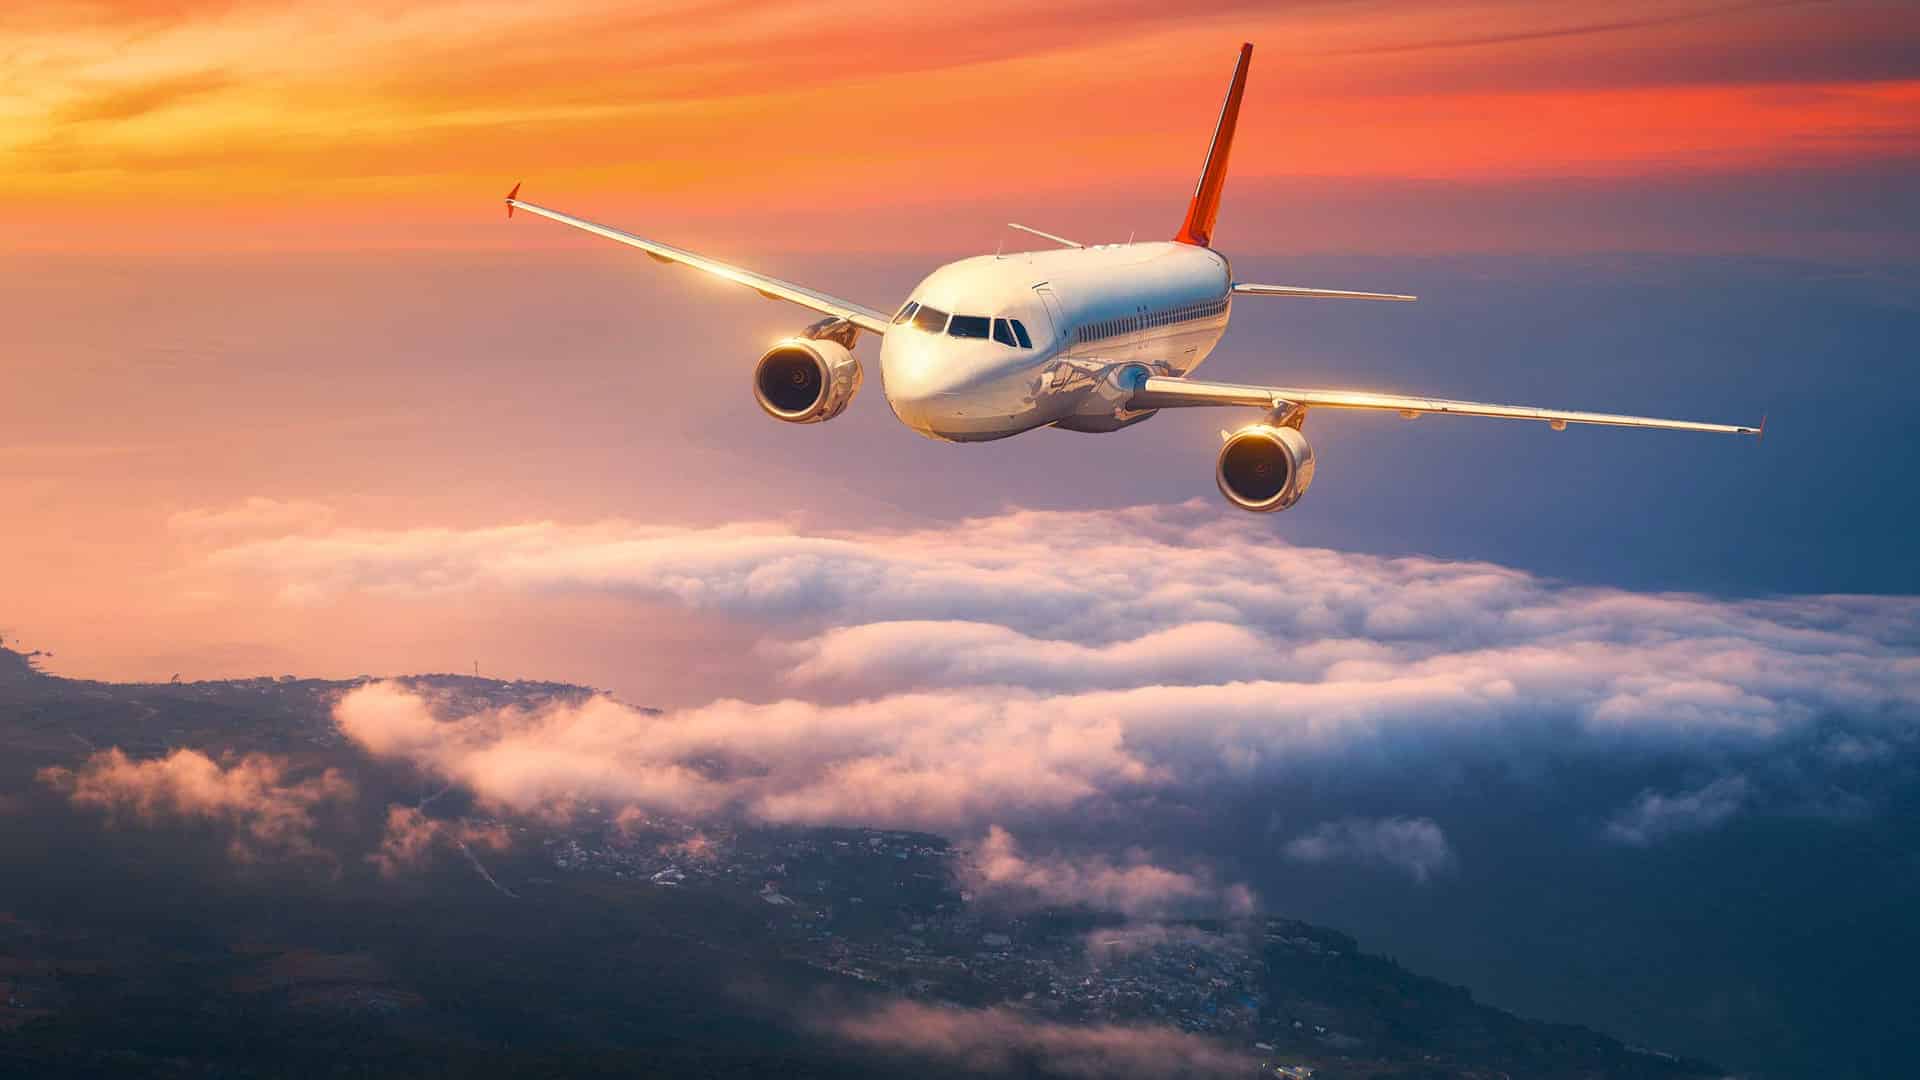 Indian aviation industry was able to breathe a little easier in 2021